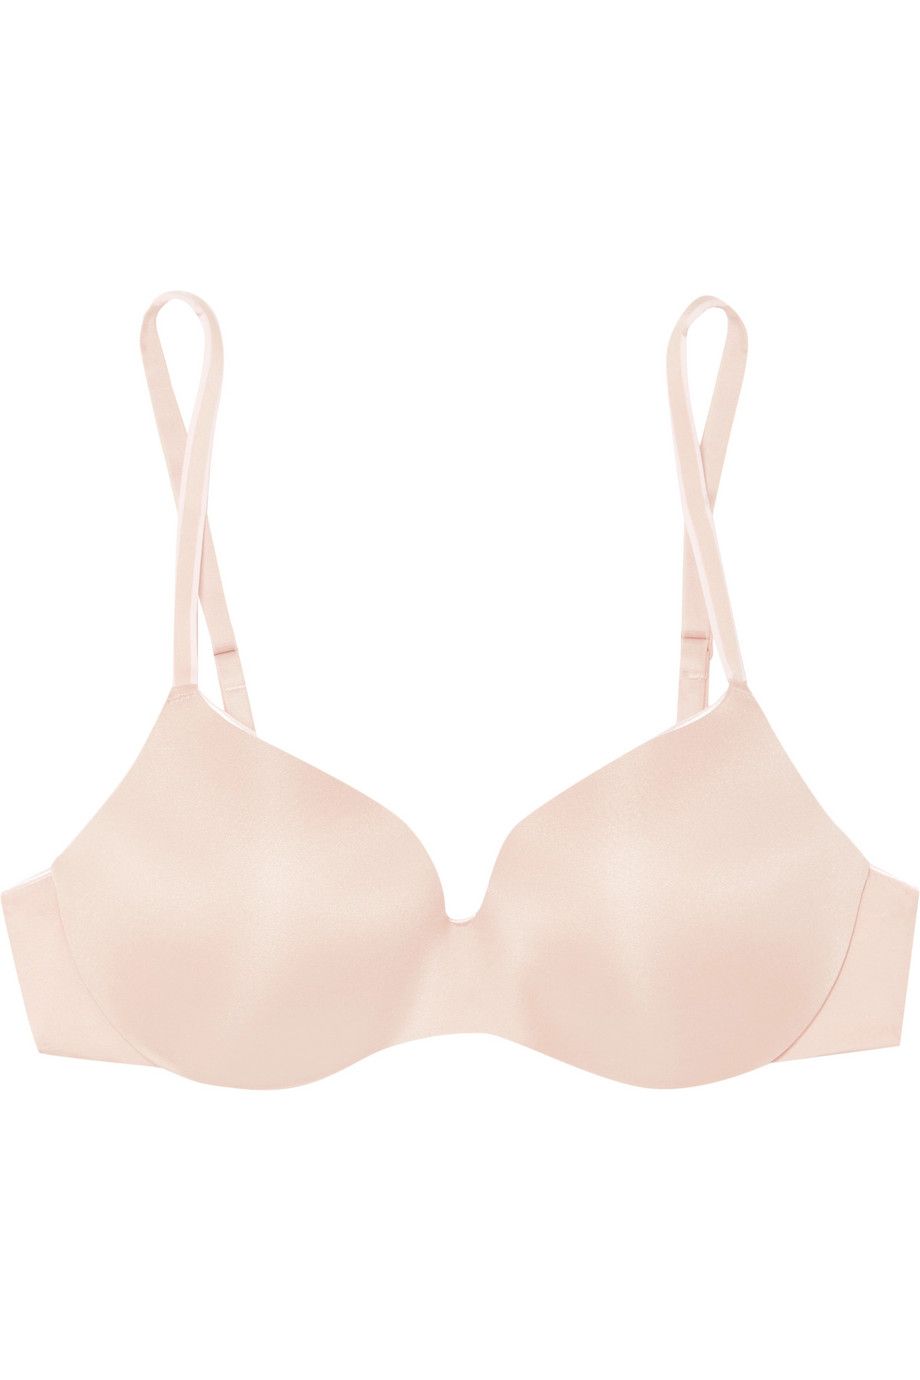 Kayser Lingerie - Not sure of your bra size? With the states opening up  it's time to start wearing bras again! With our painless, short and sweet  quiz, we'll get you fitted